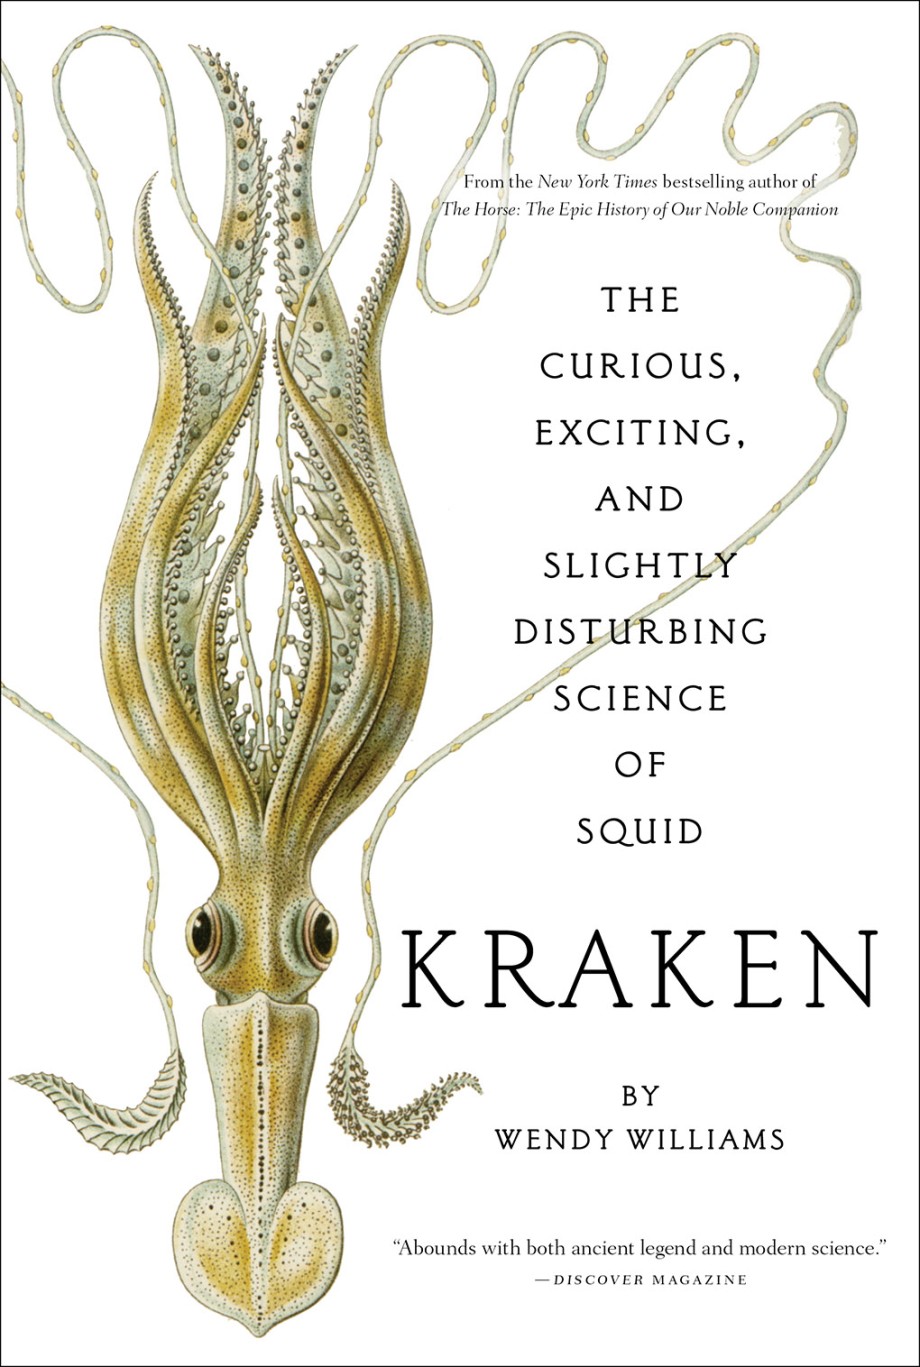 Kraken The Curious, Exciting, and Slightly Disturbing Science of Squid